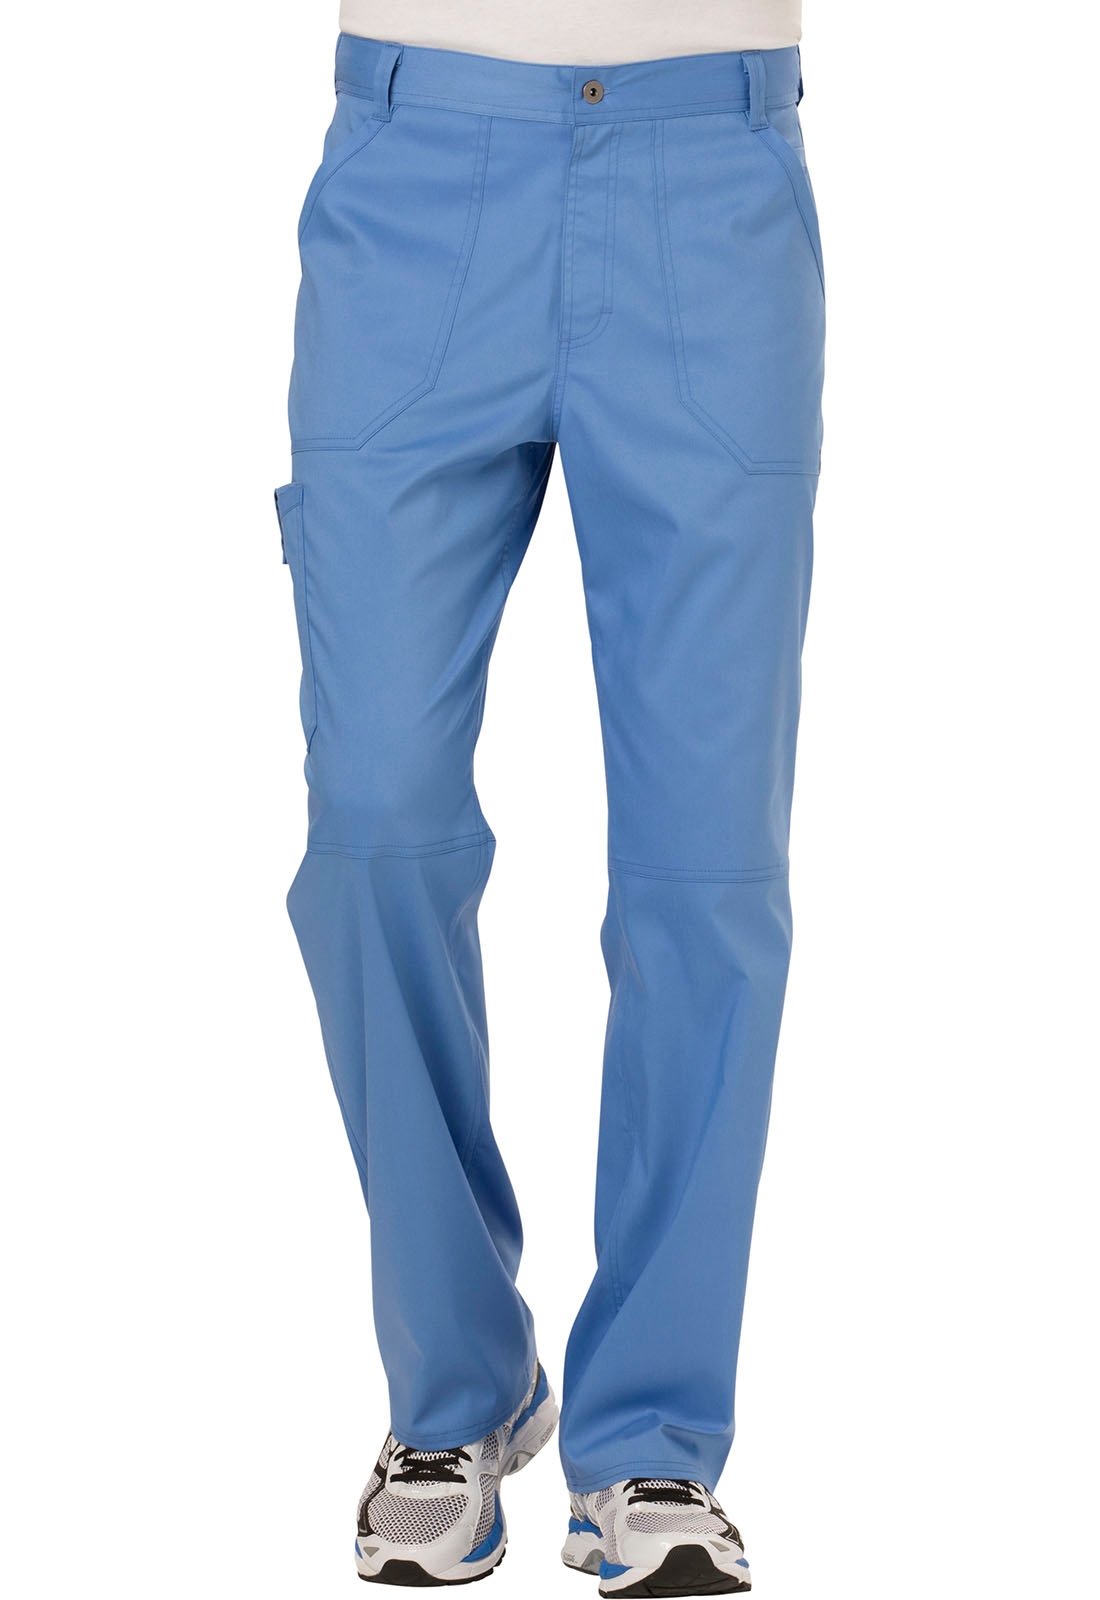 Button Fly Royal Blue Chino Trousers